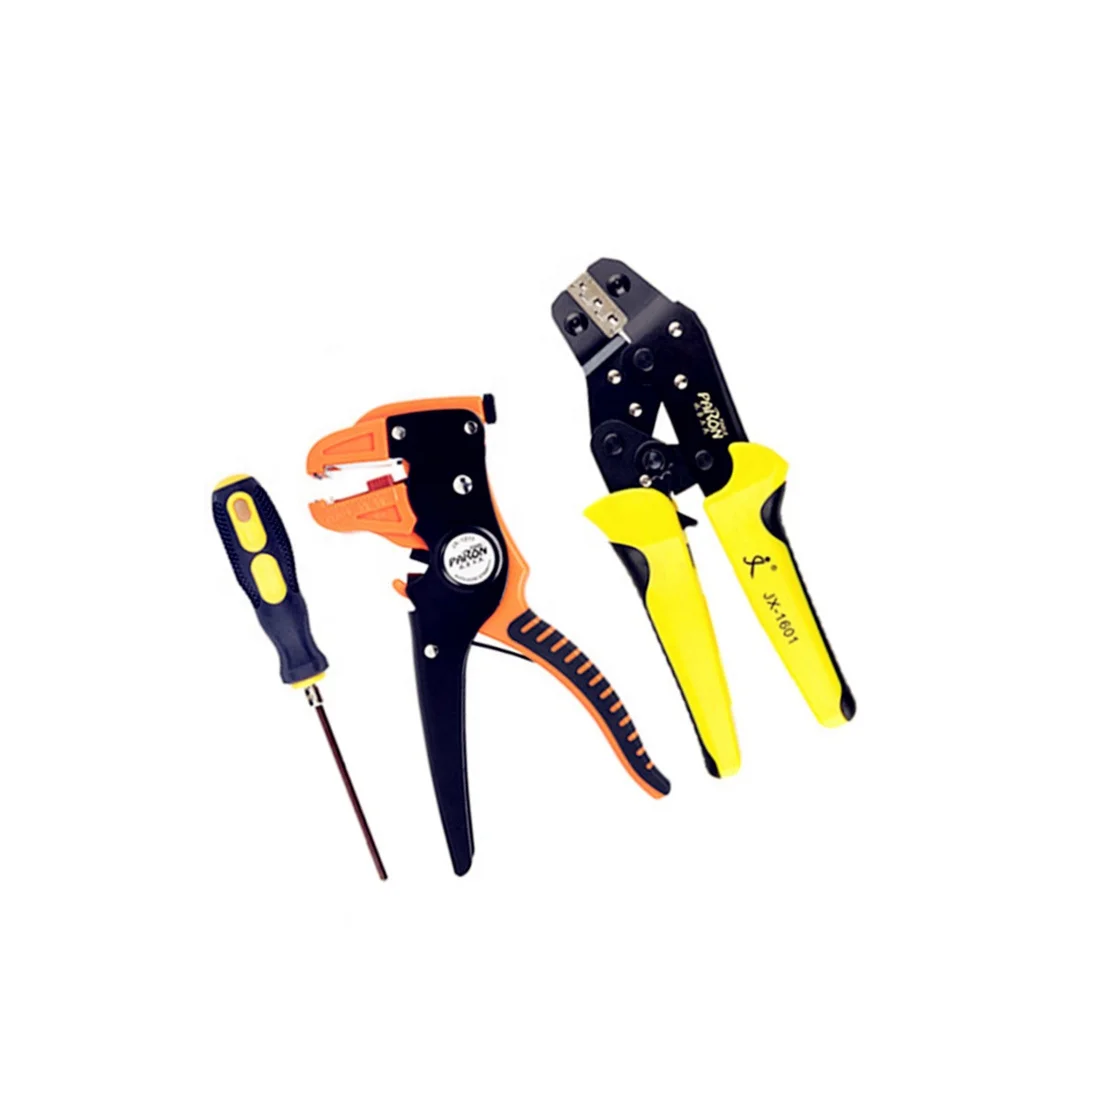 PARON Multitool Pliers Duck Mouth Hand Wire Stripping Tool Wire Crimping Stripping Bag